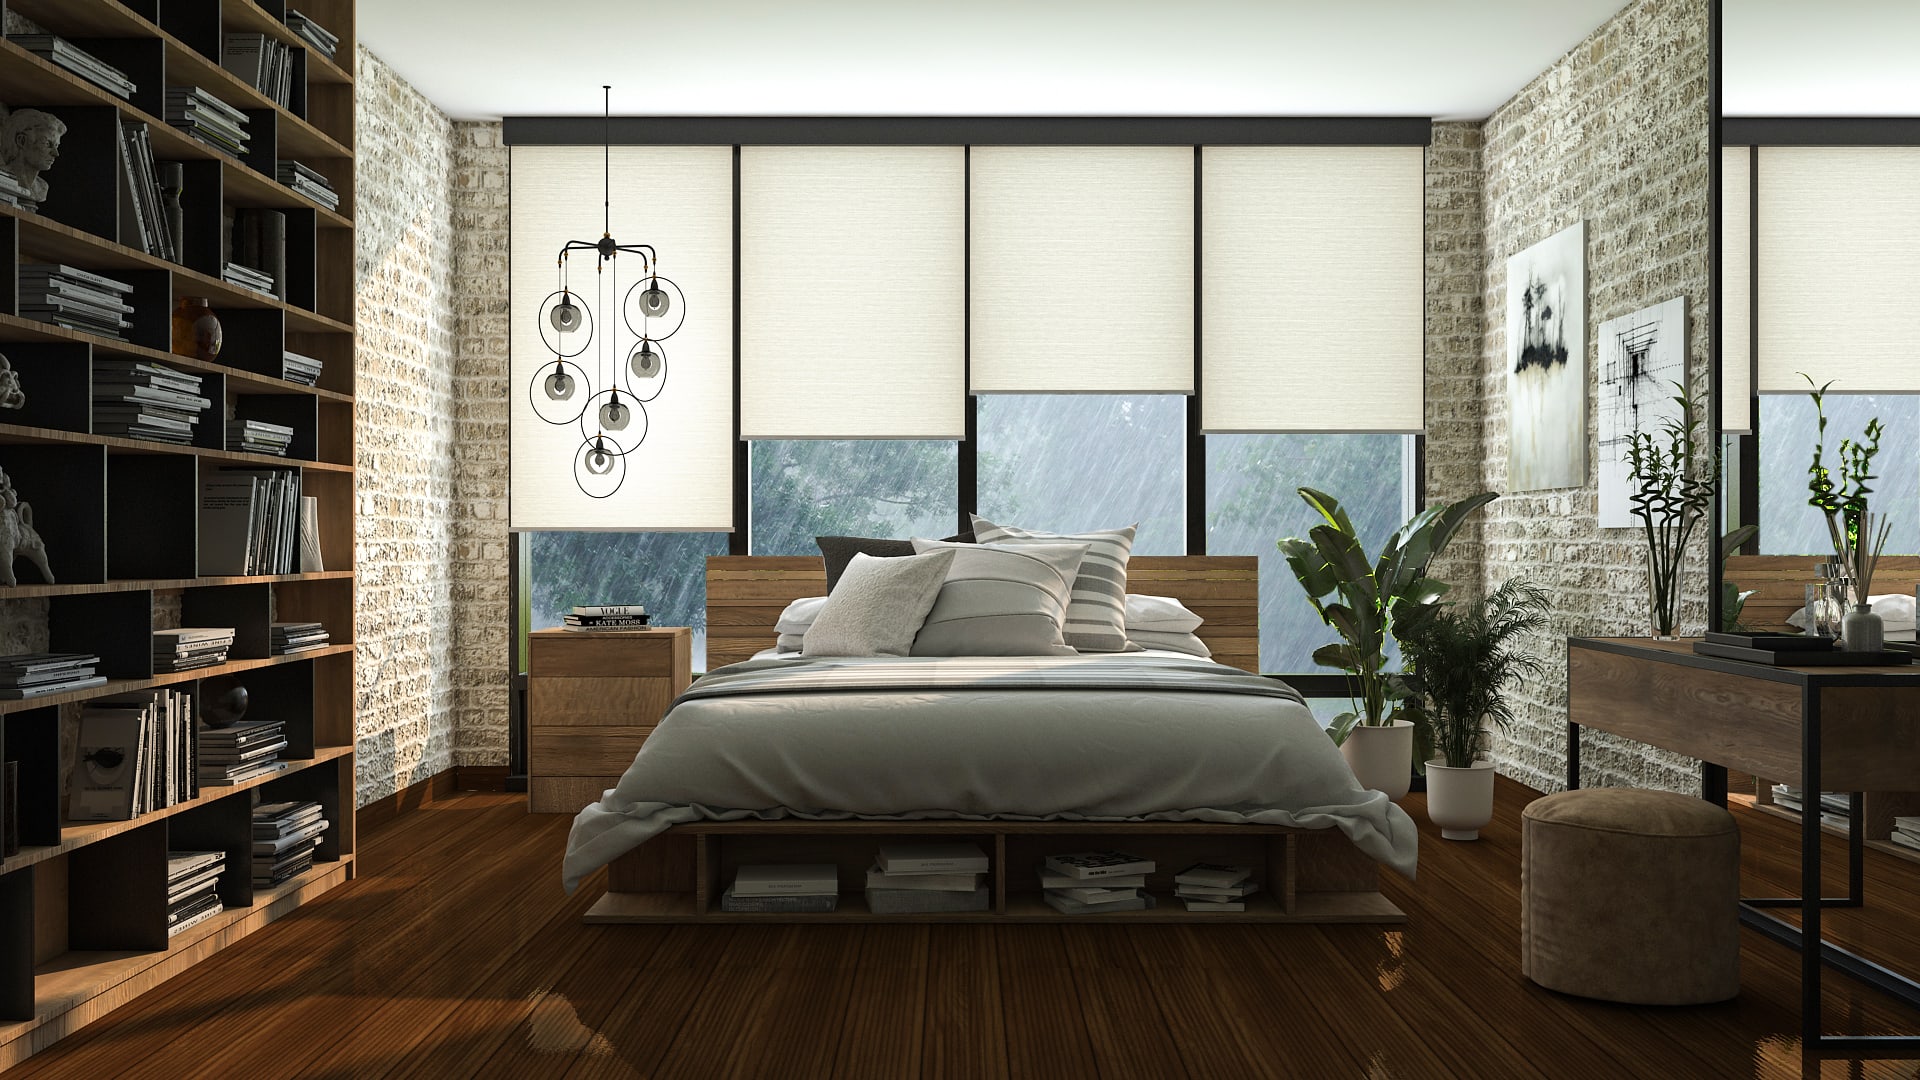 Urban rustic guest room ideas by Homilo